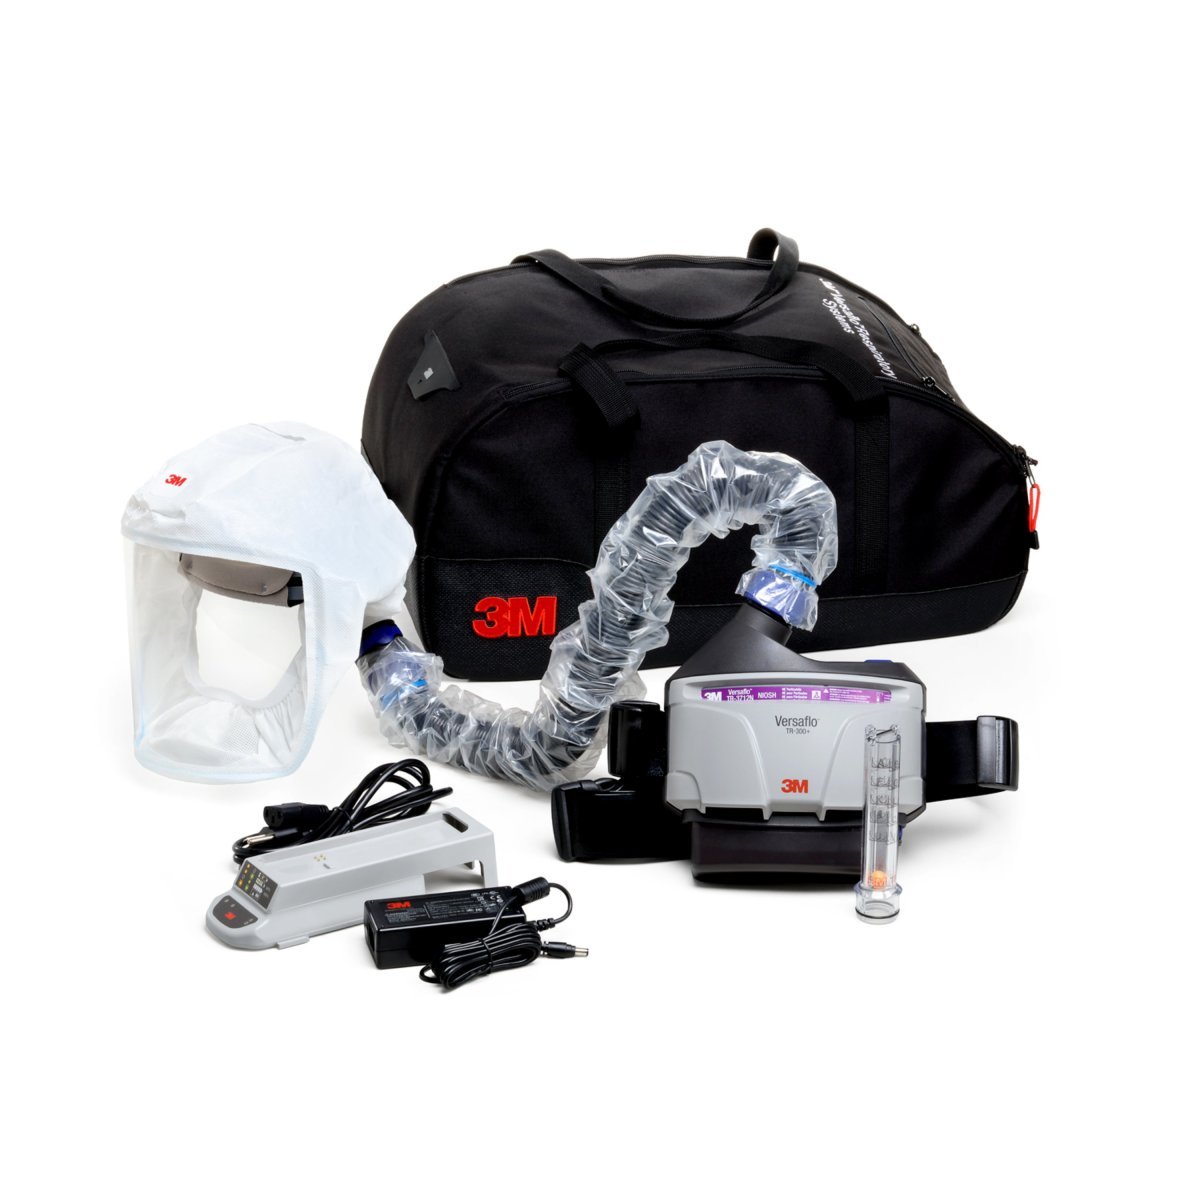 3M™ Versaflo™ Medium TR-300N+ HKS Healthcare High Efficiency Powered Air Purifying Respirator Kit With Lithium Ion Rechargeable